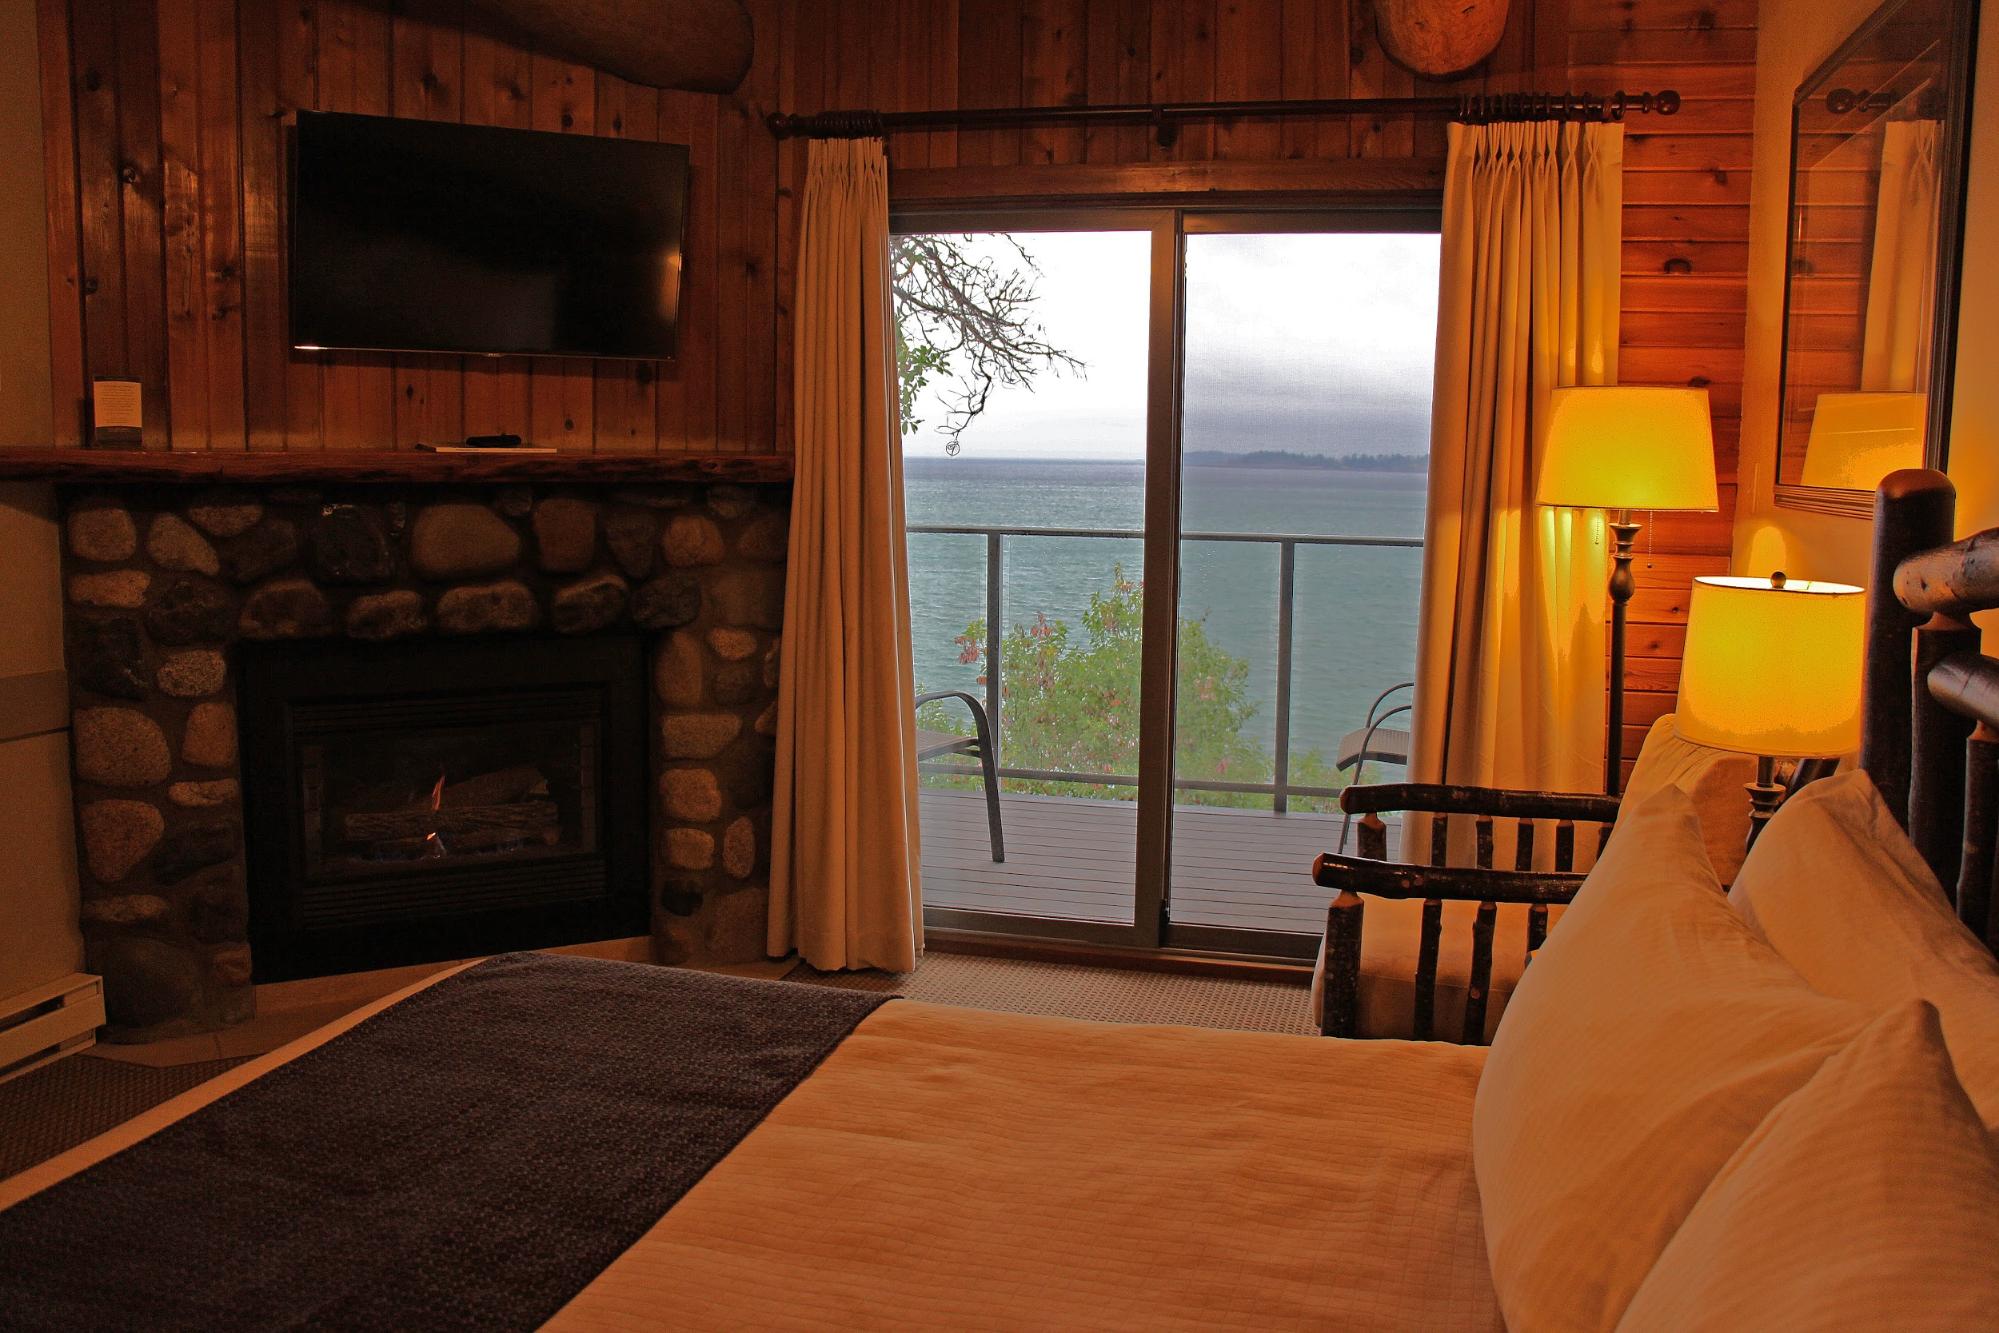 The cozy interior of a resort bedroom at Tigh-Na-Mara with a fireplace and private balcony overlooking the water.